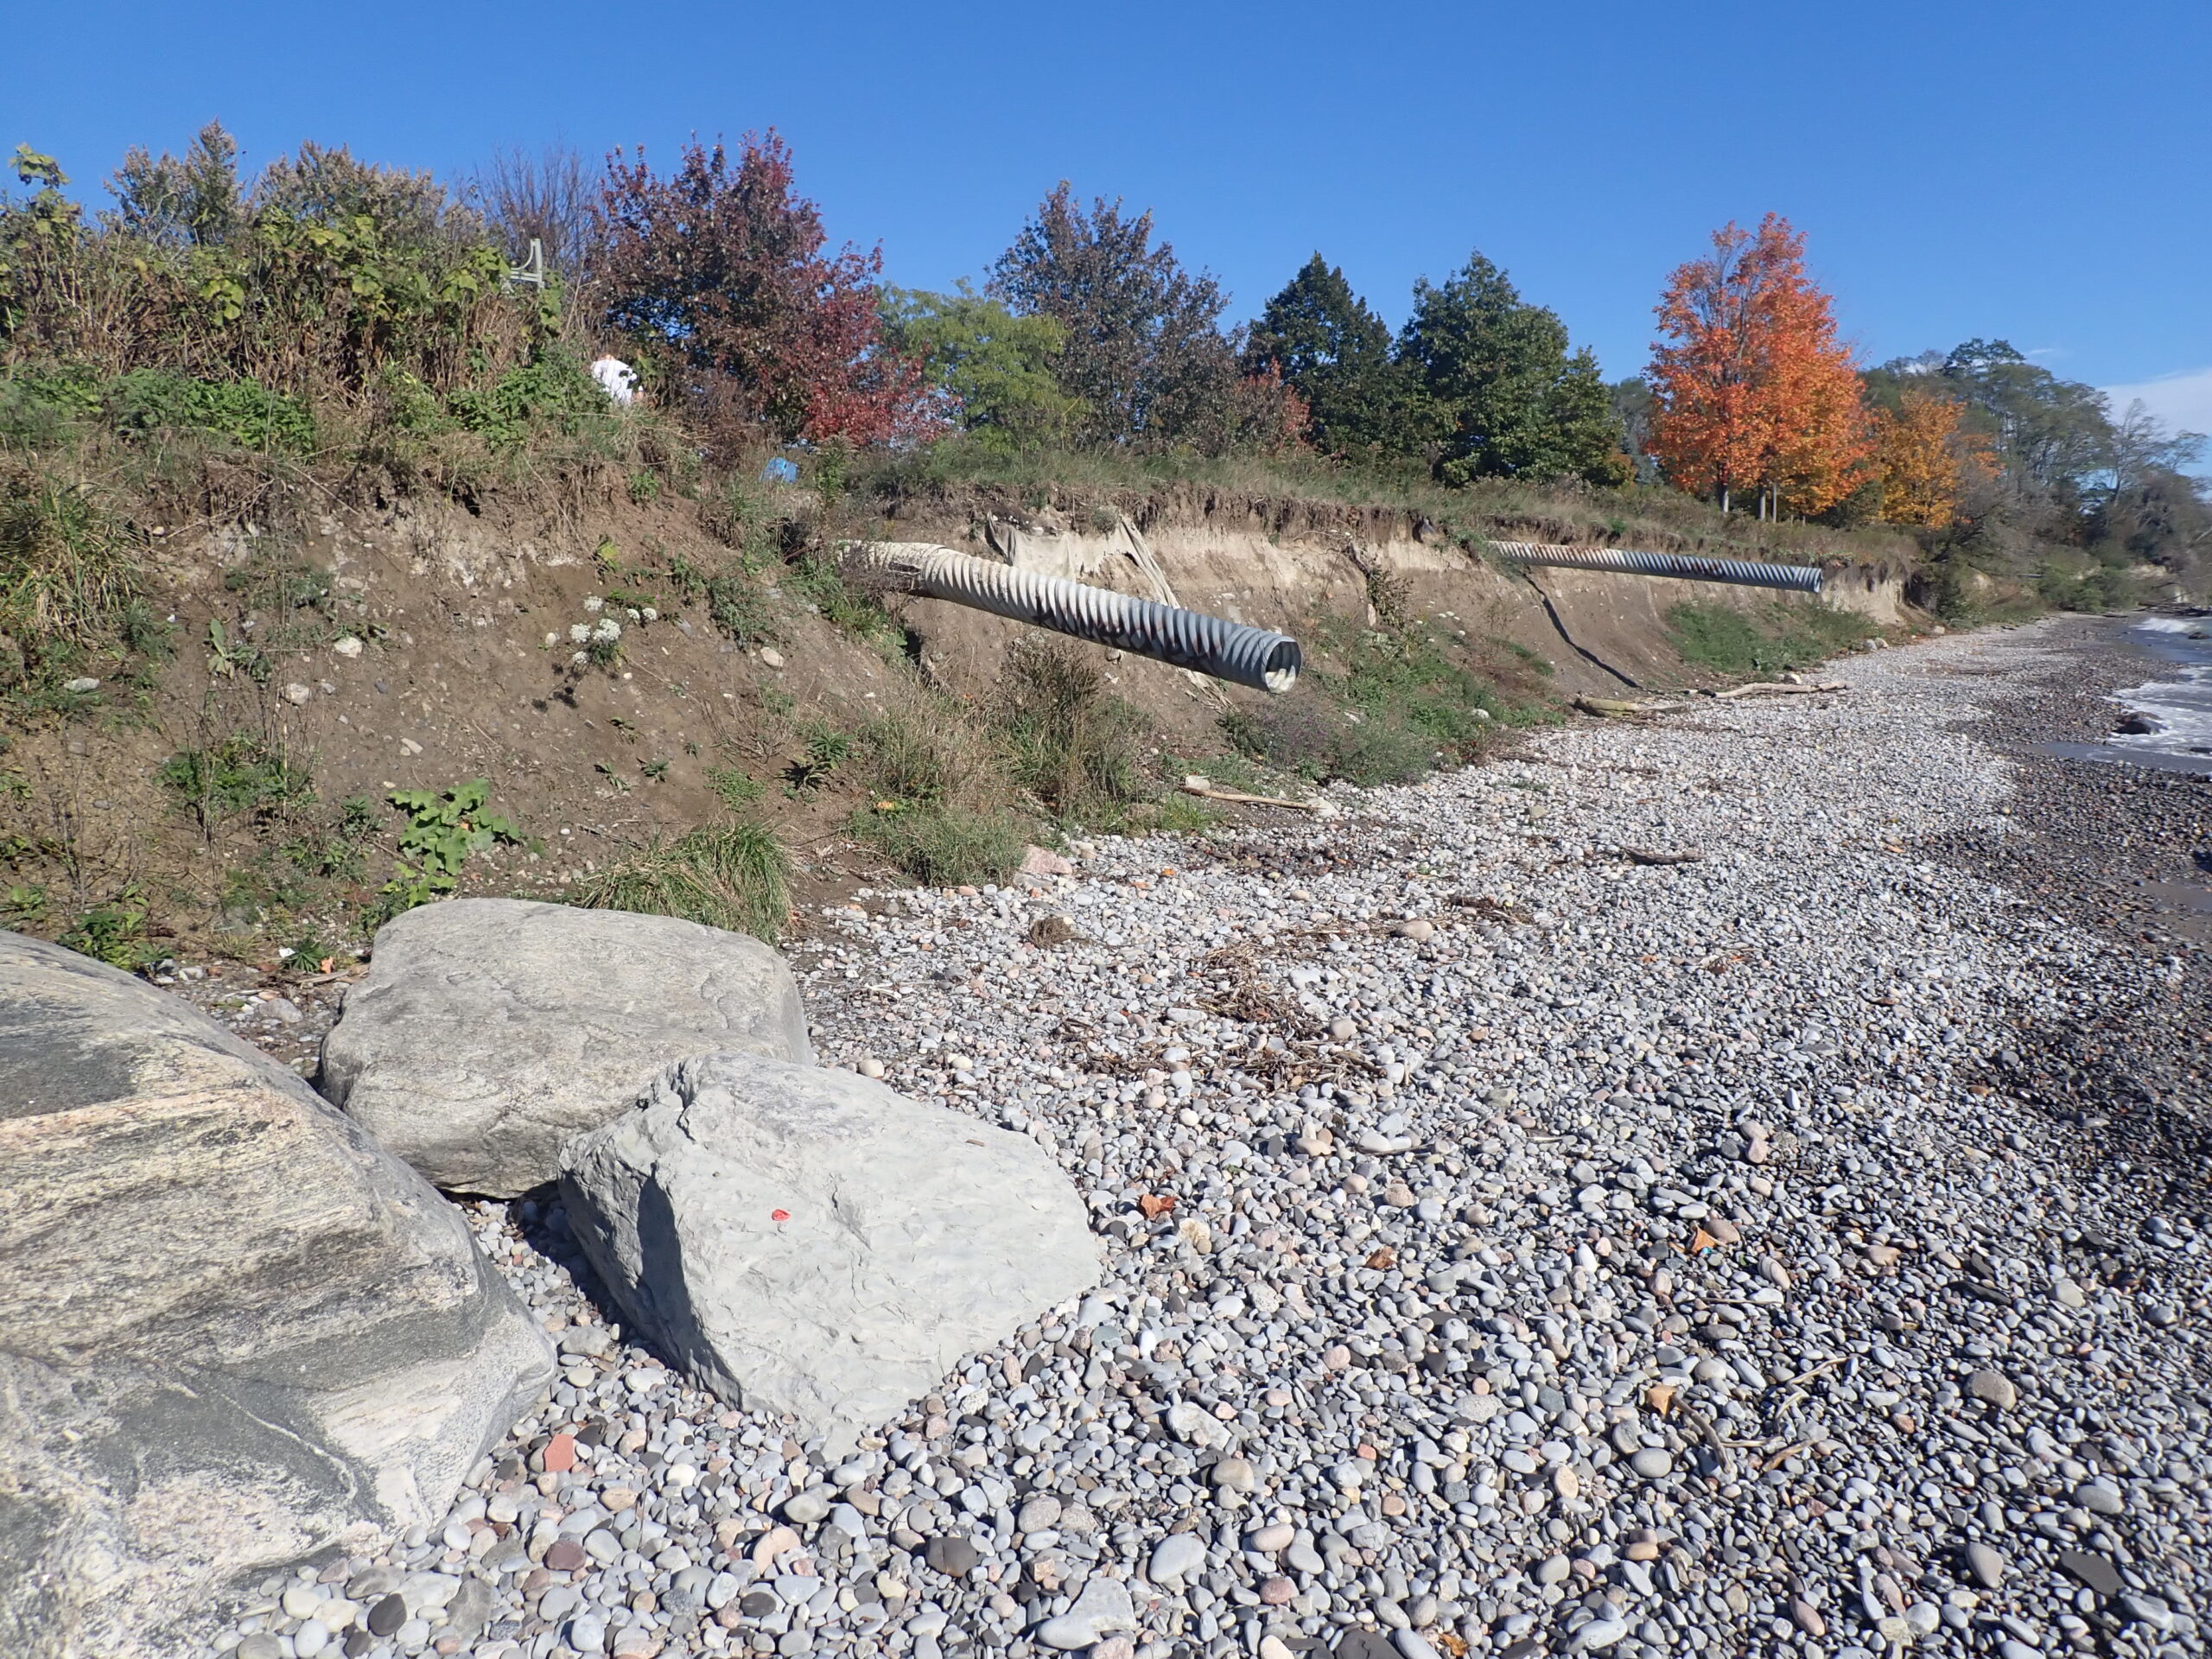 A stretch of Ajax shoreline showing rocky beach and eroded bluffs exposing two long drainage pipes.